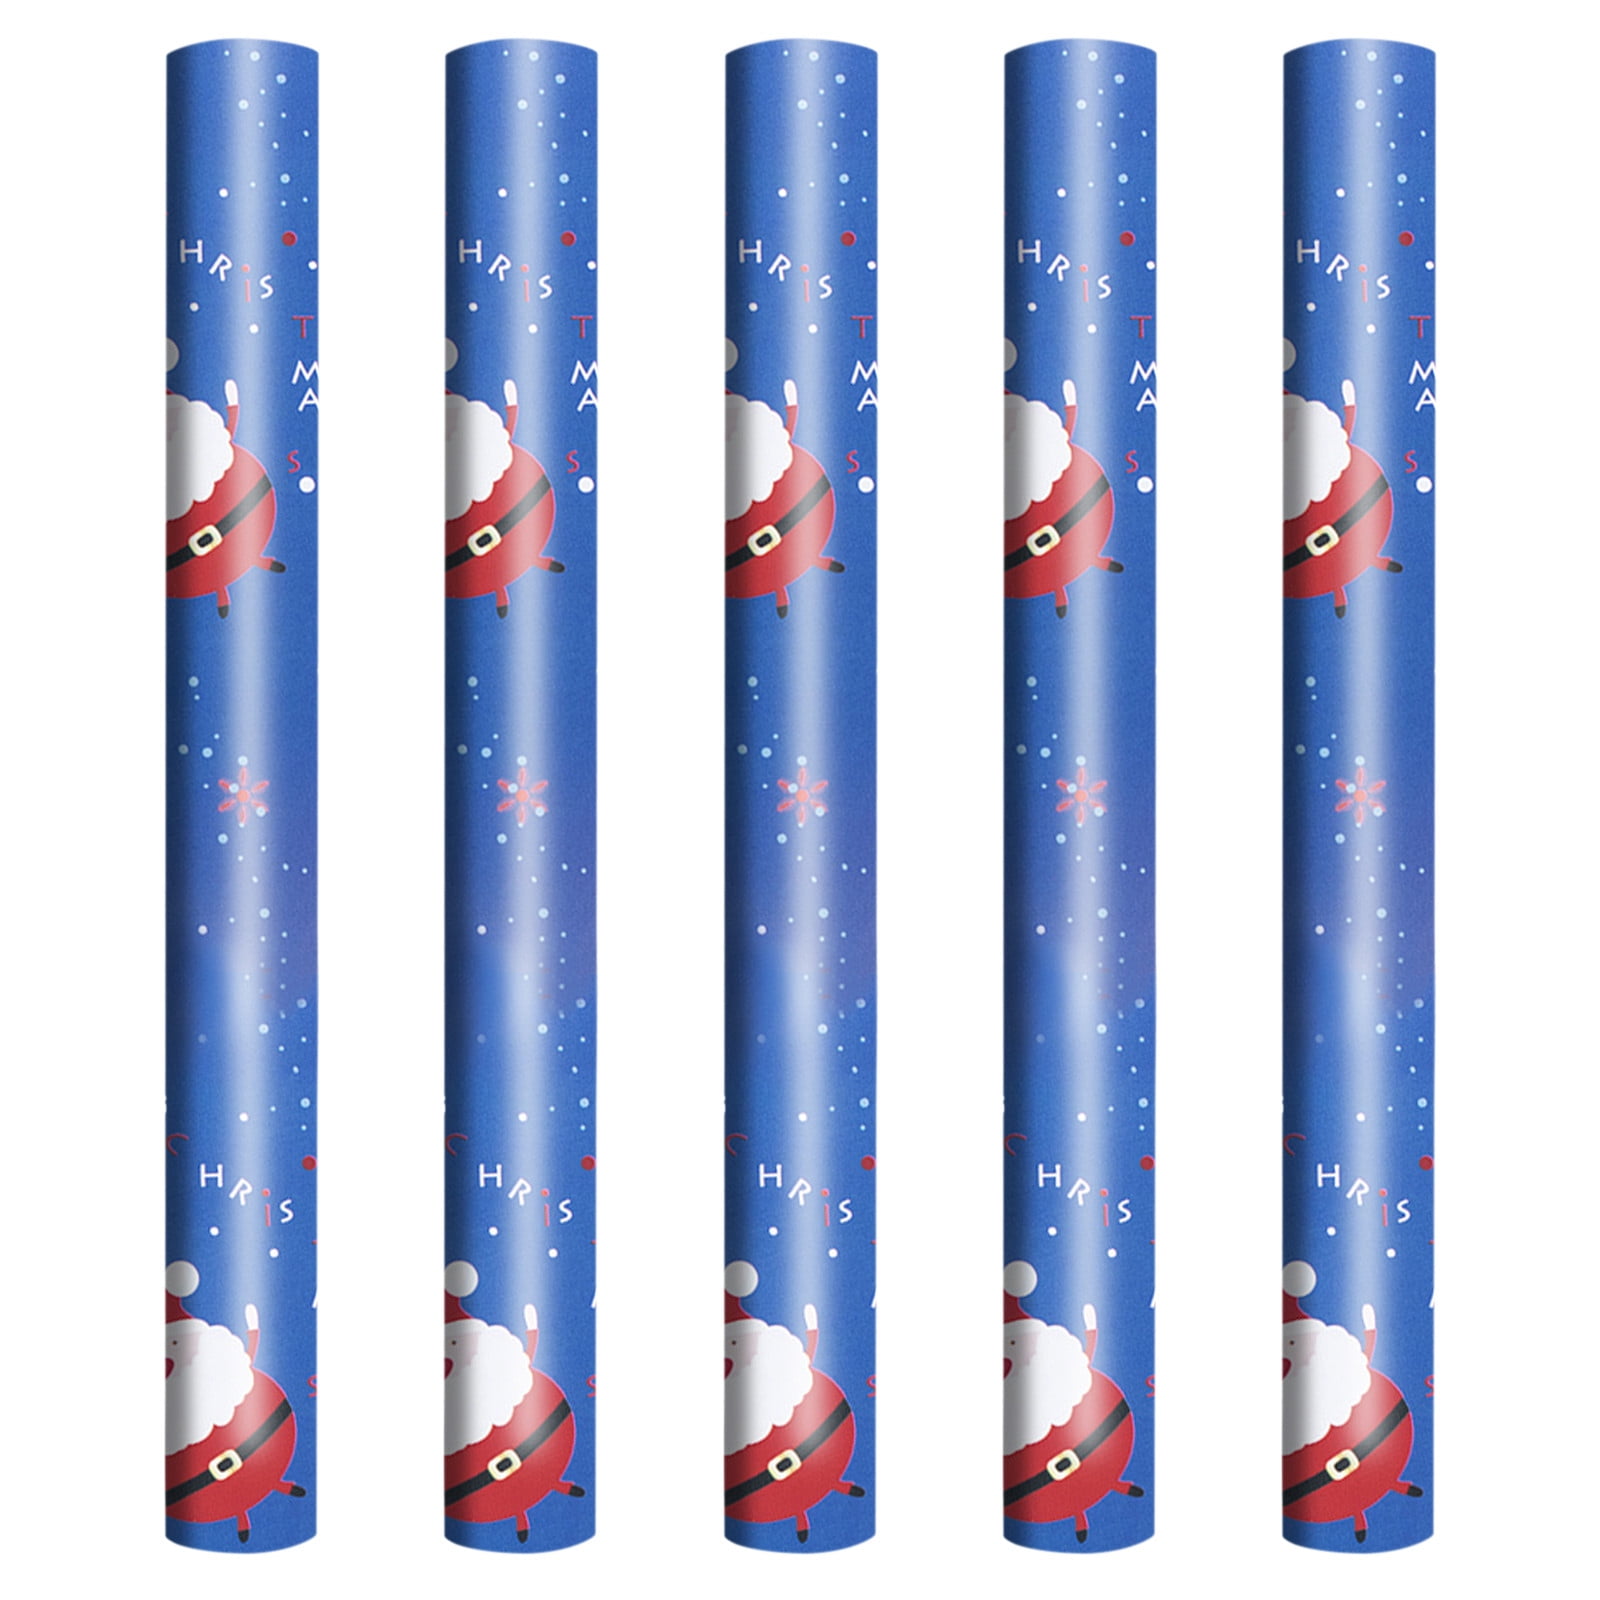 Santa & Friends Jumbo Christmas Rolled Gift Wrap - 1 Giant Roll, 23 Inches  Wide by 35 feet Long, Heavyweight, Tear-Resistant, Holiday Wrapping Paper 